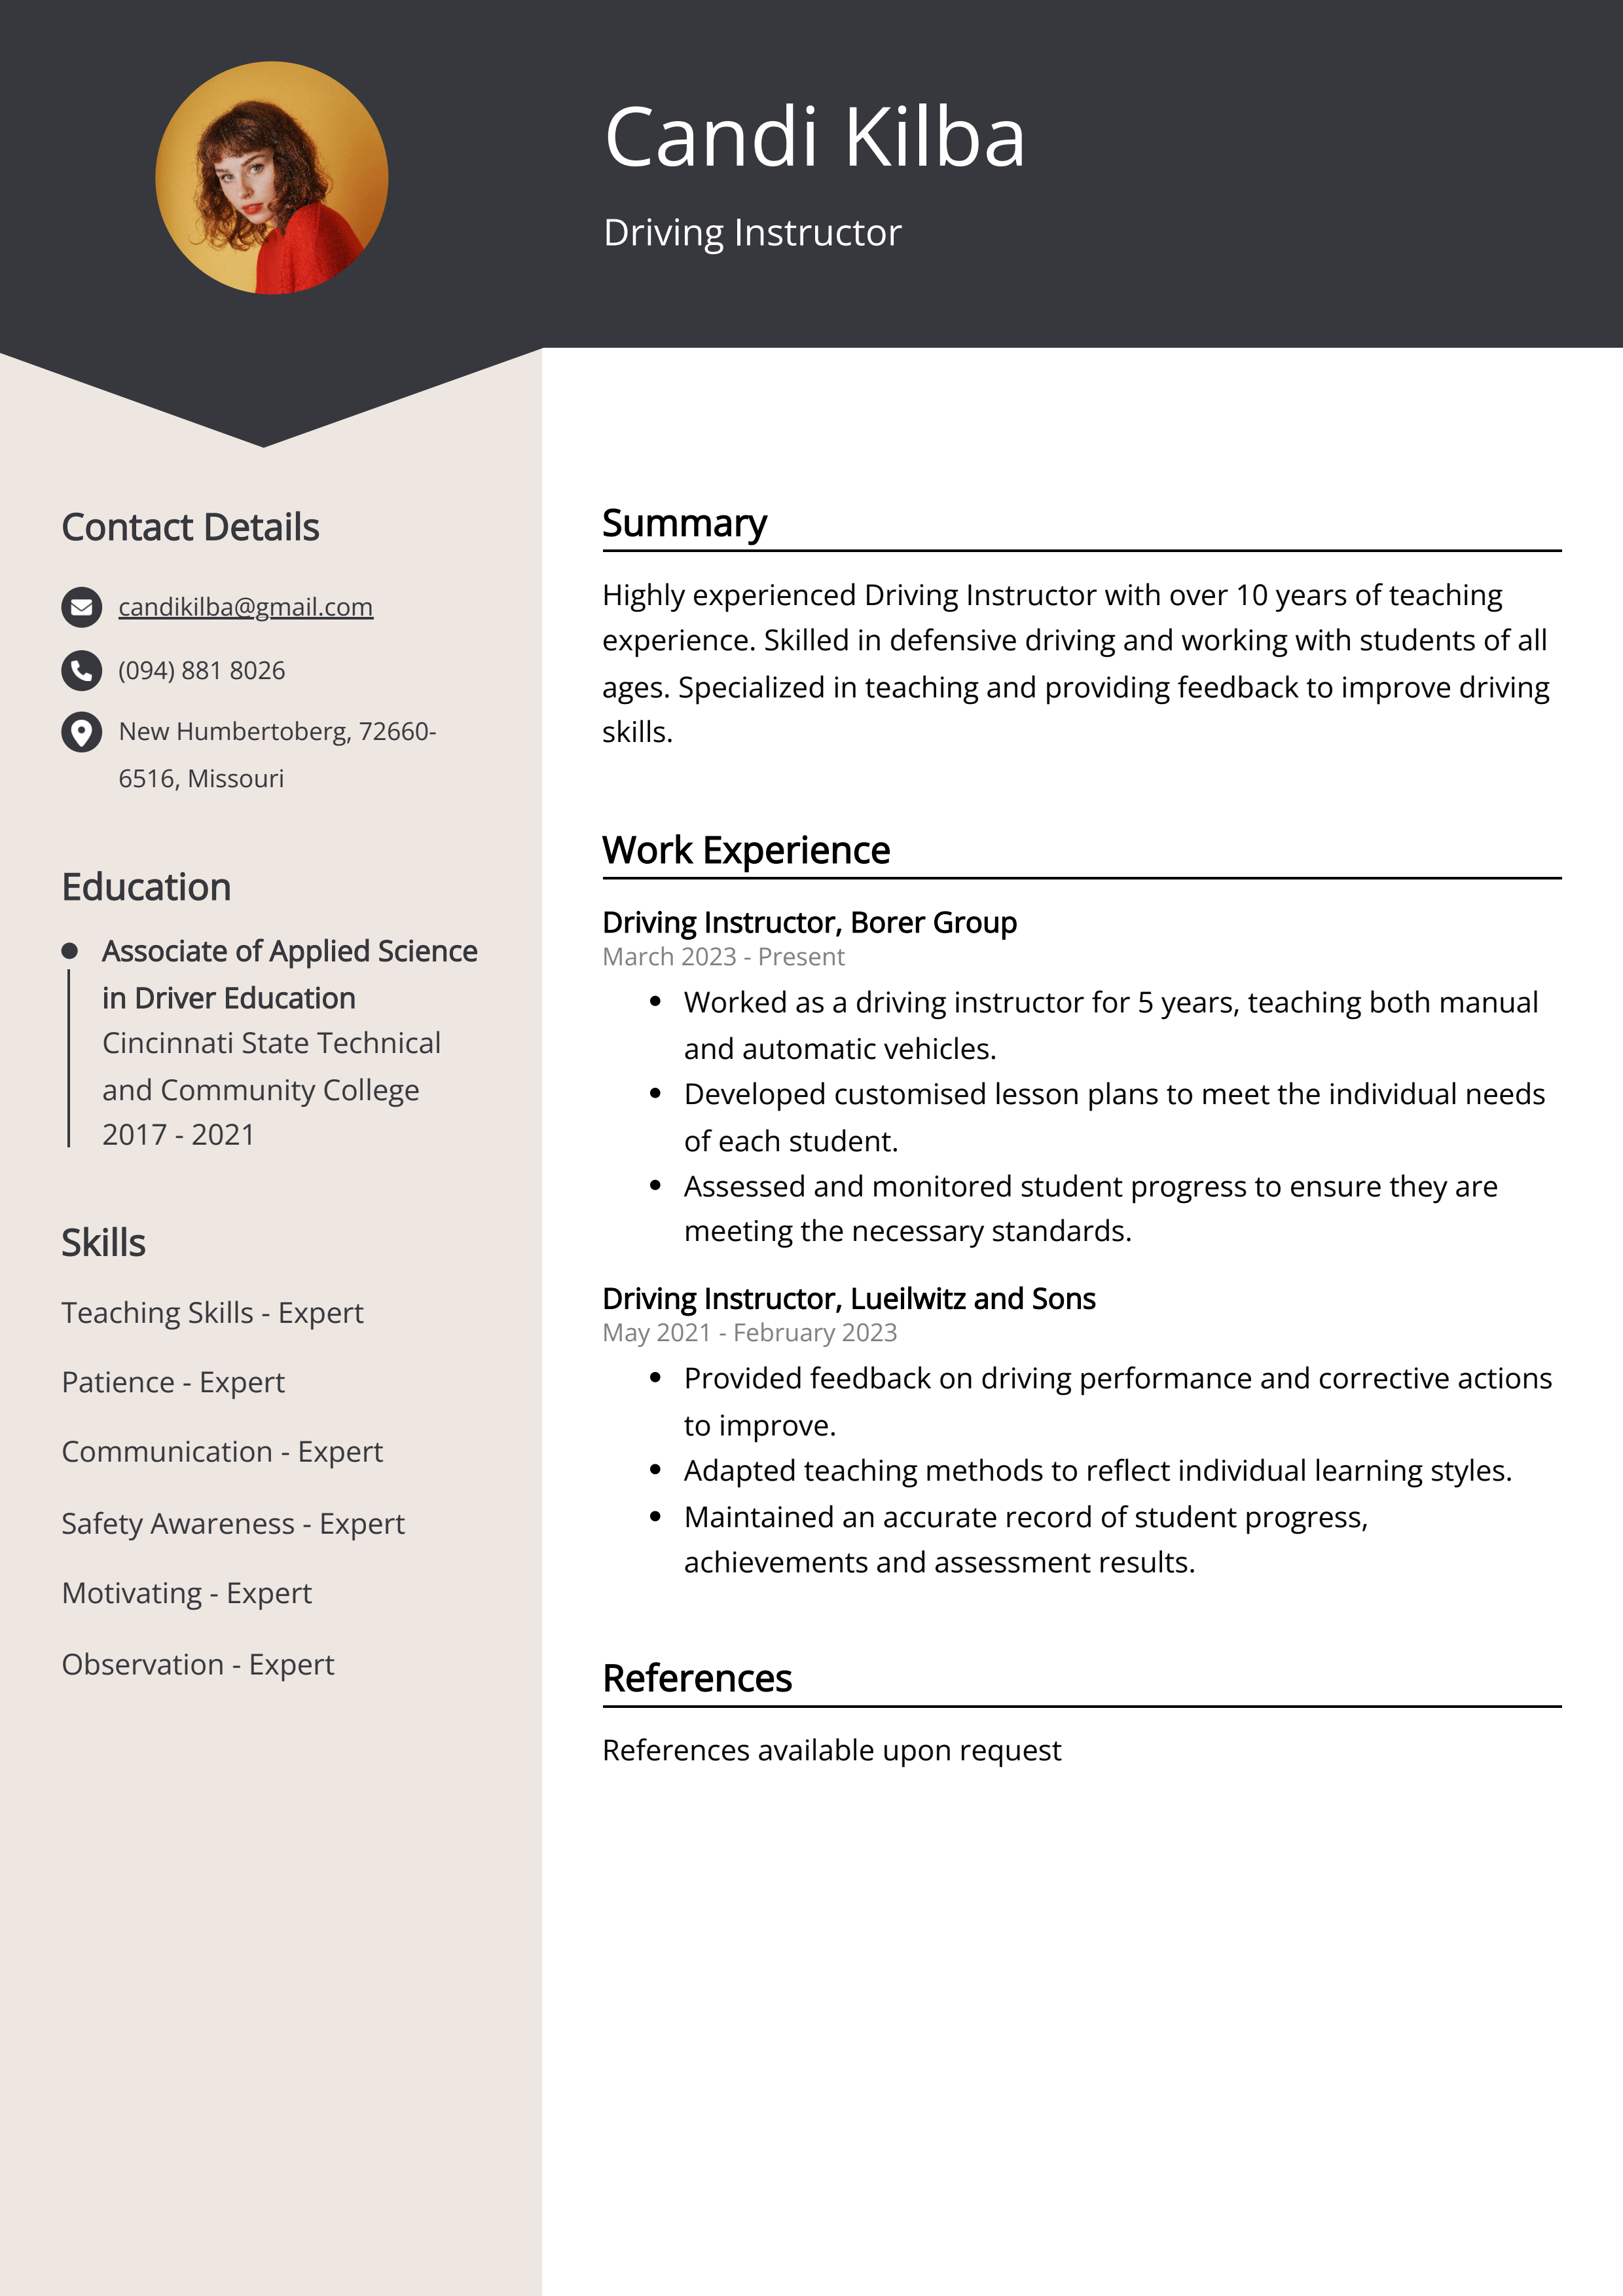 Driving Instructor CV Example